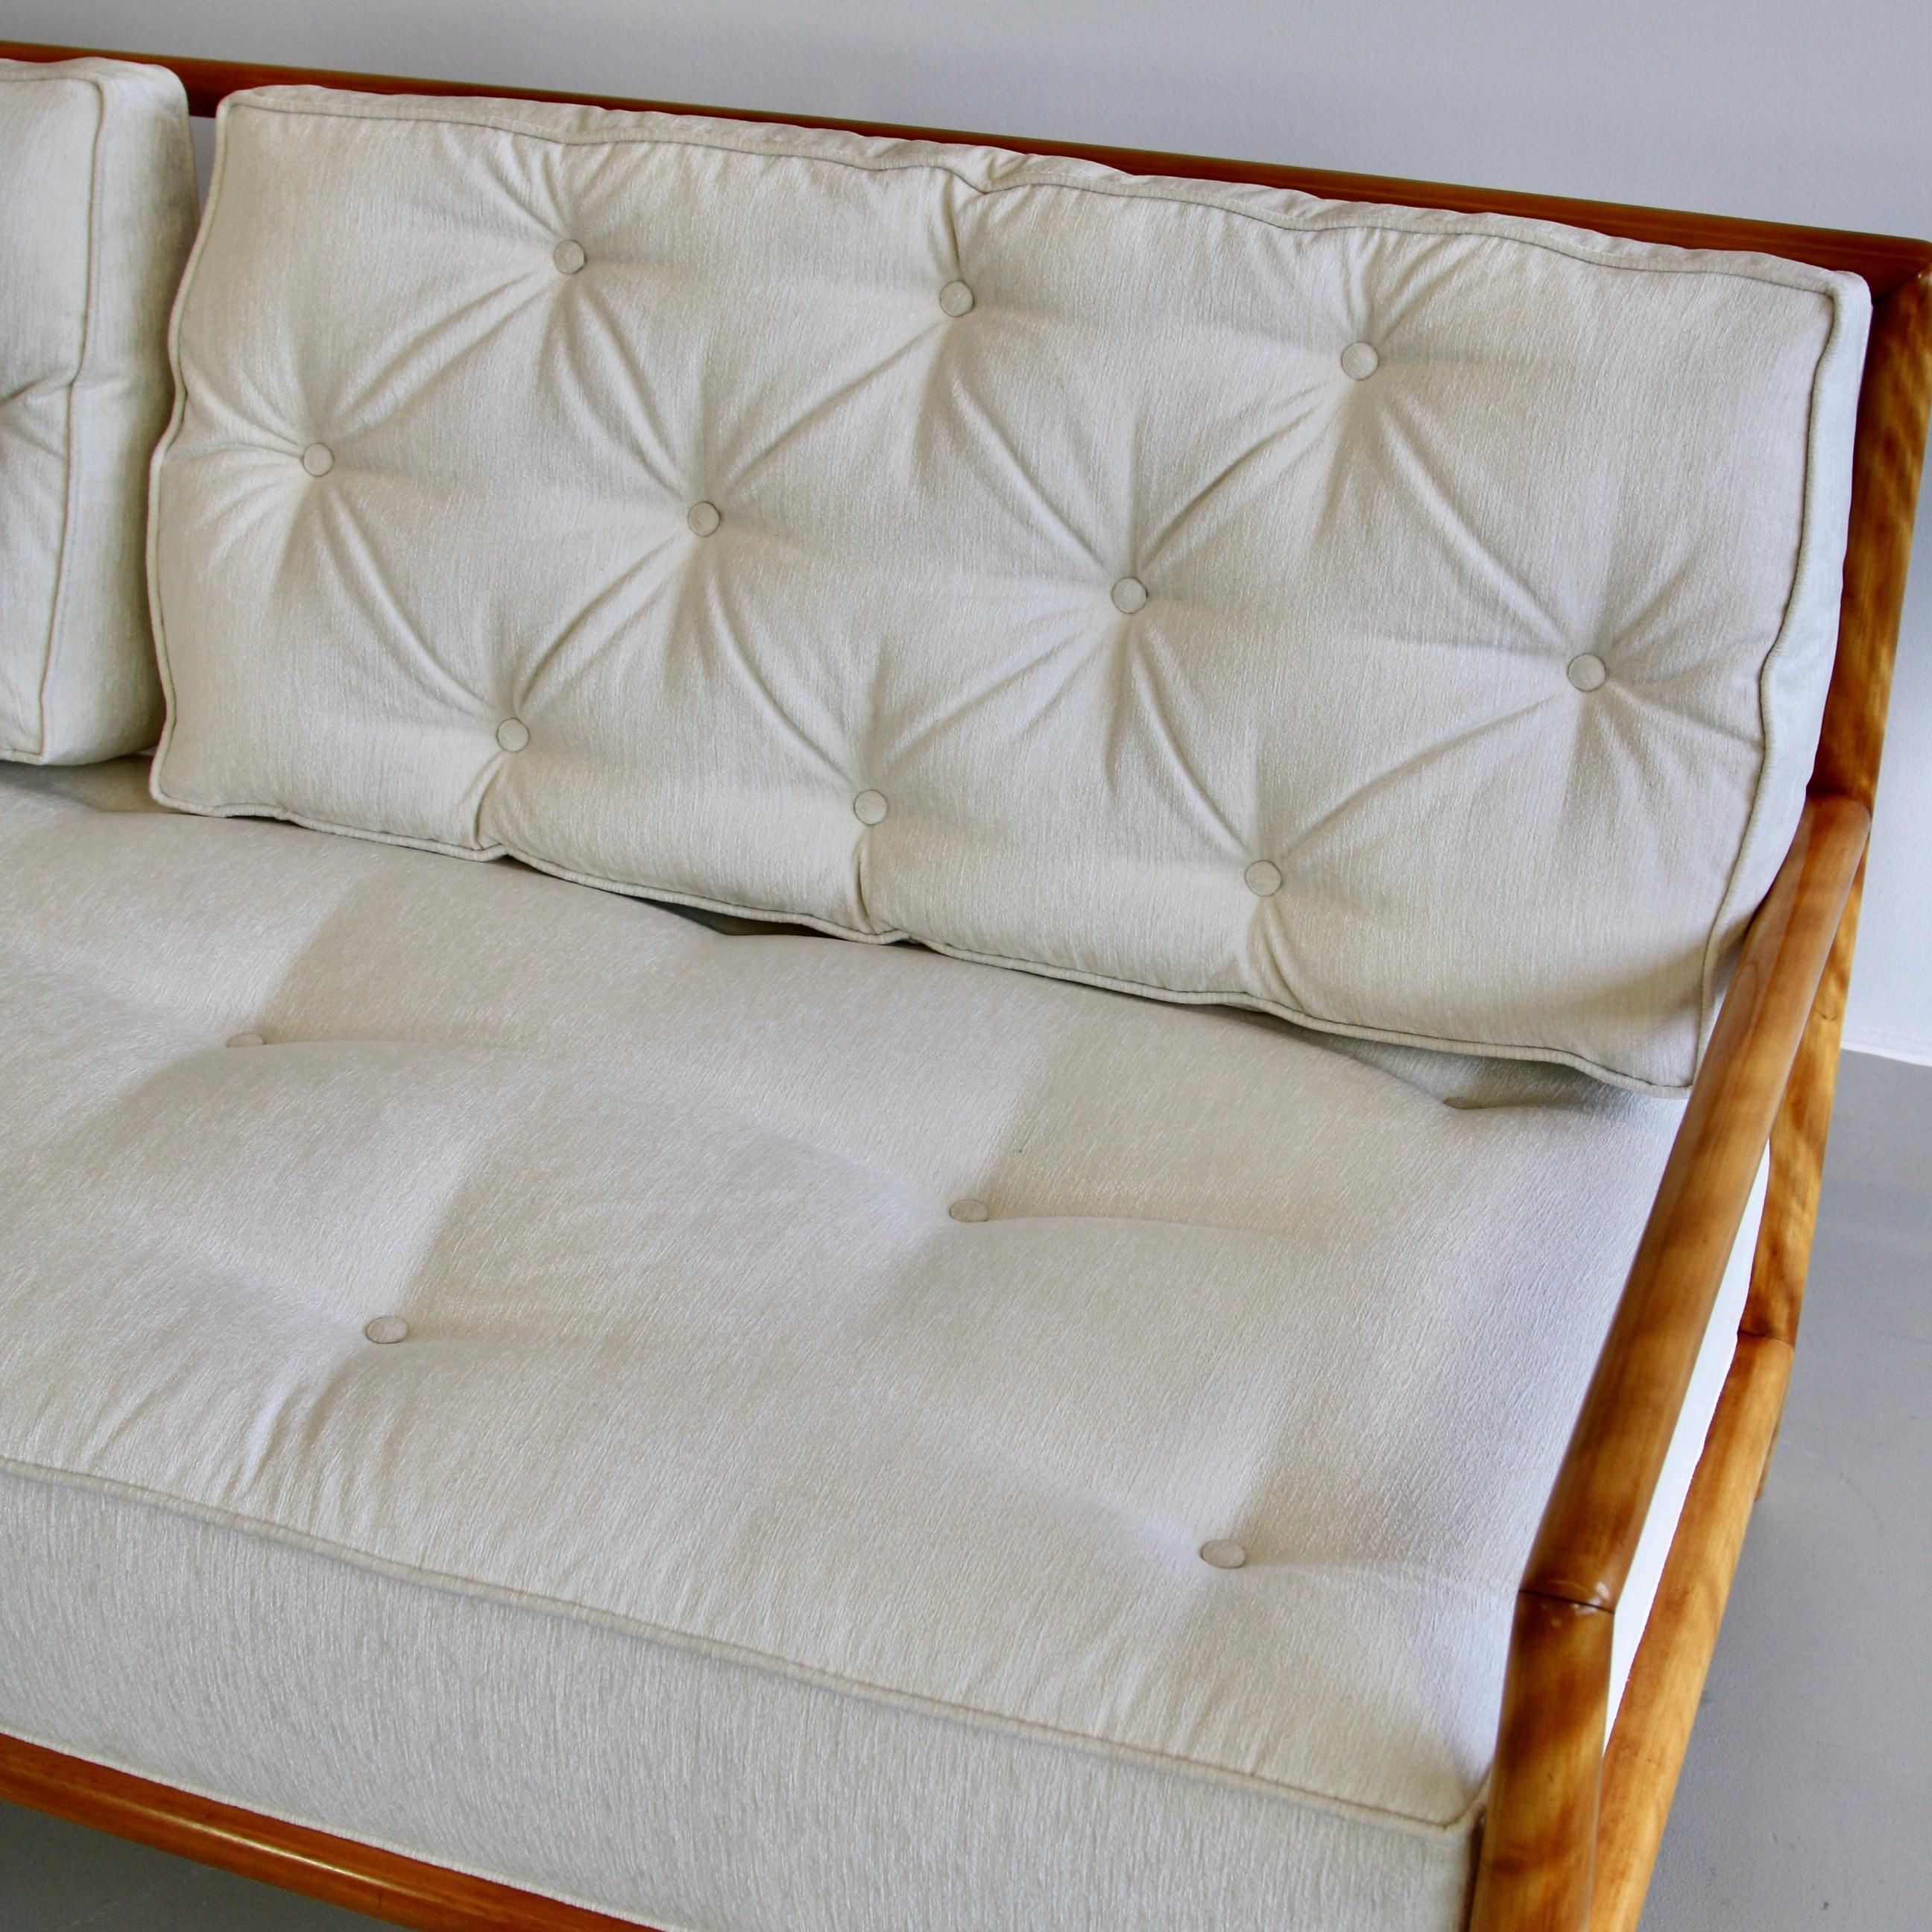 Large two-seat sofa designed by T.H. Robsjohn-Gibbings. U.S.A., Widdicomb Furniture Co., circa 1955.

Sofa (model 1678) with beautiful walnut structure, newly upholstered in ivory colored DEDAR chenille upholstery. Superb!